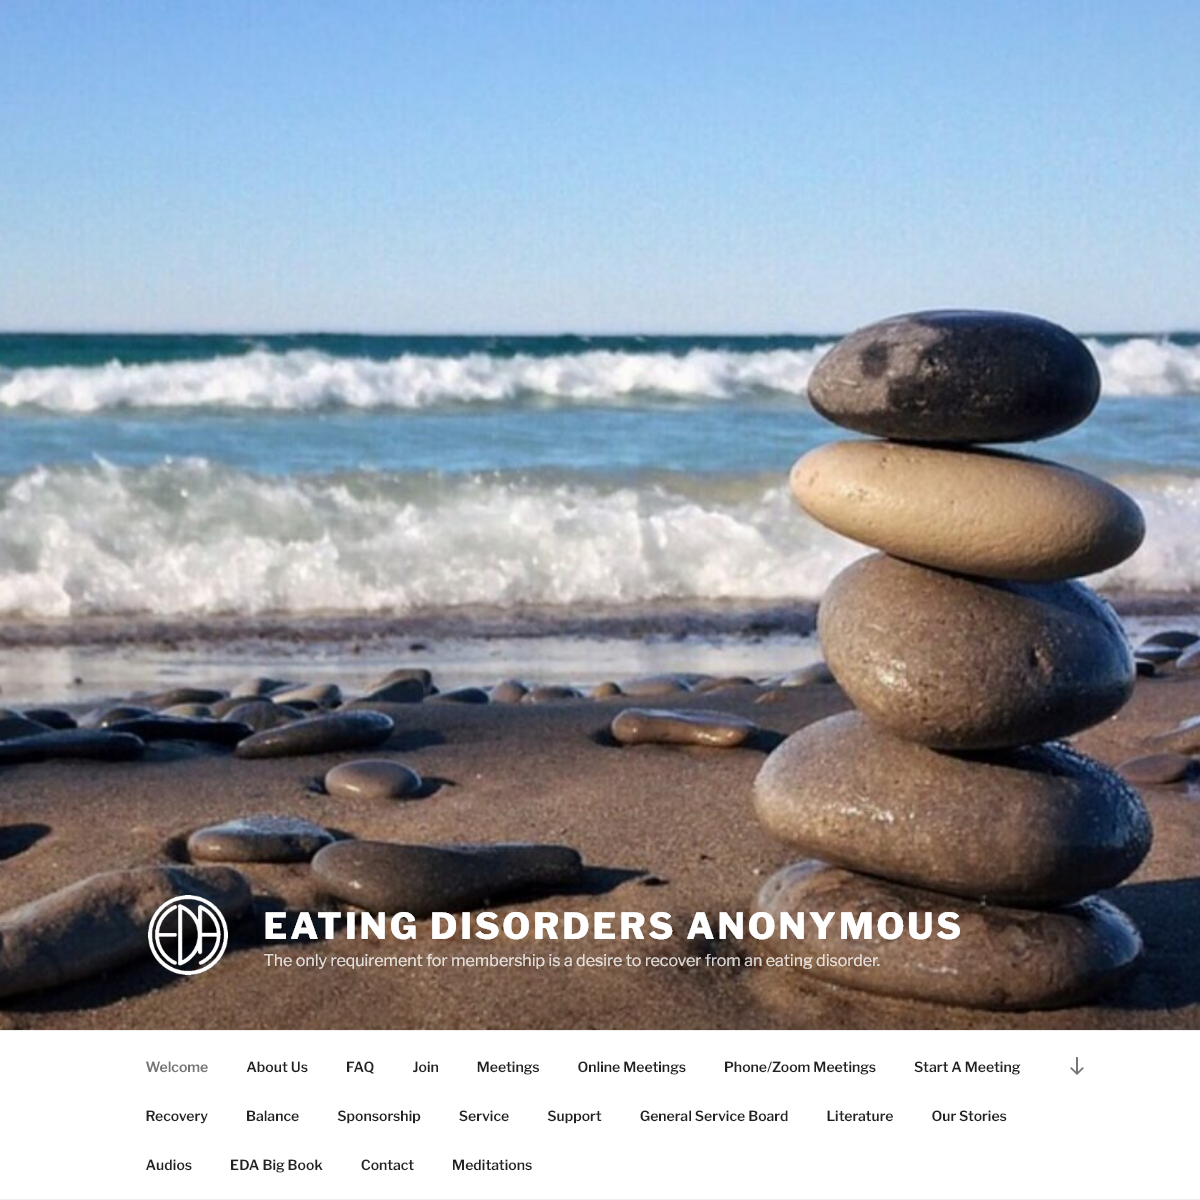 A complete backup of eatingdisordersanonymous.org